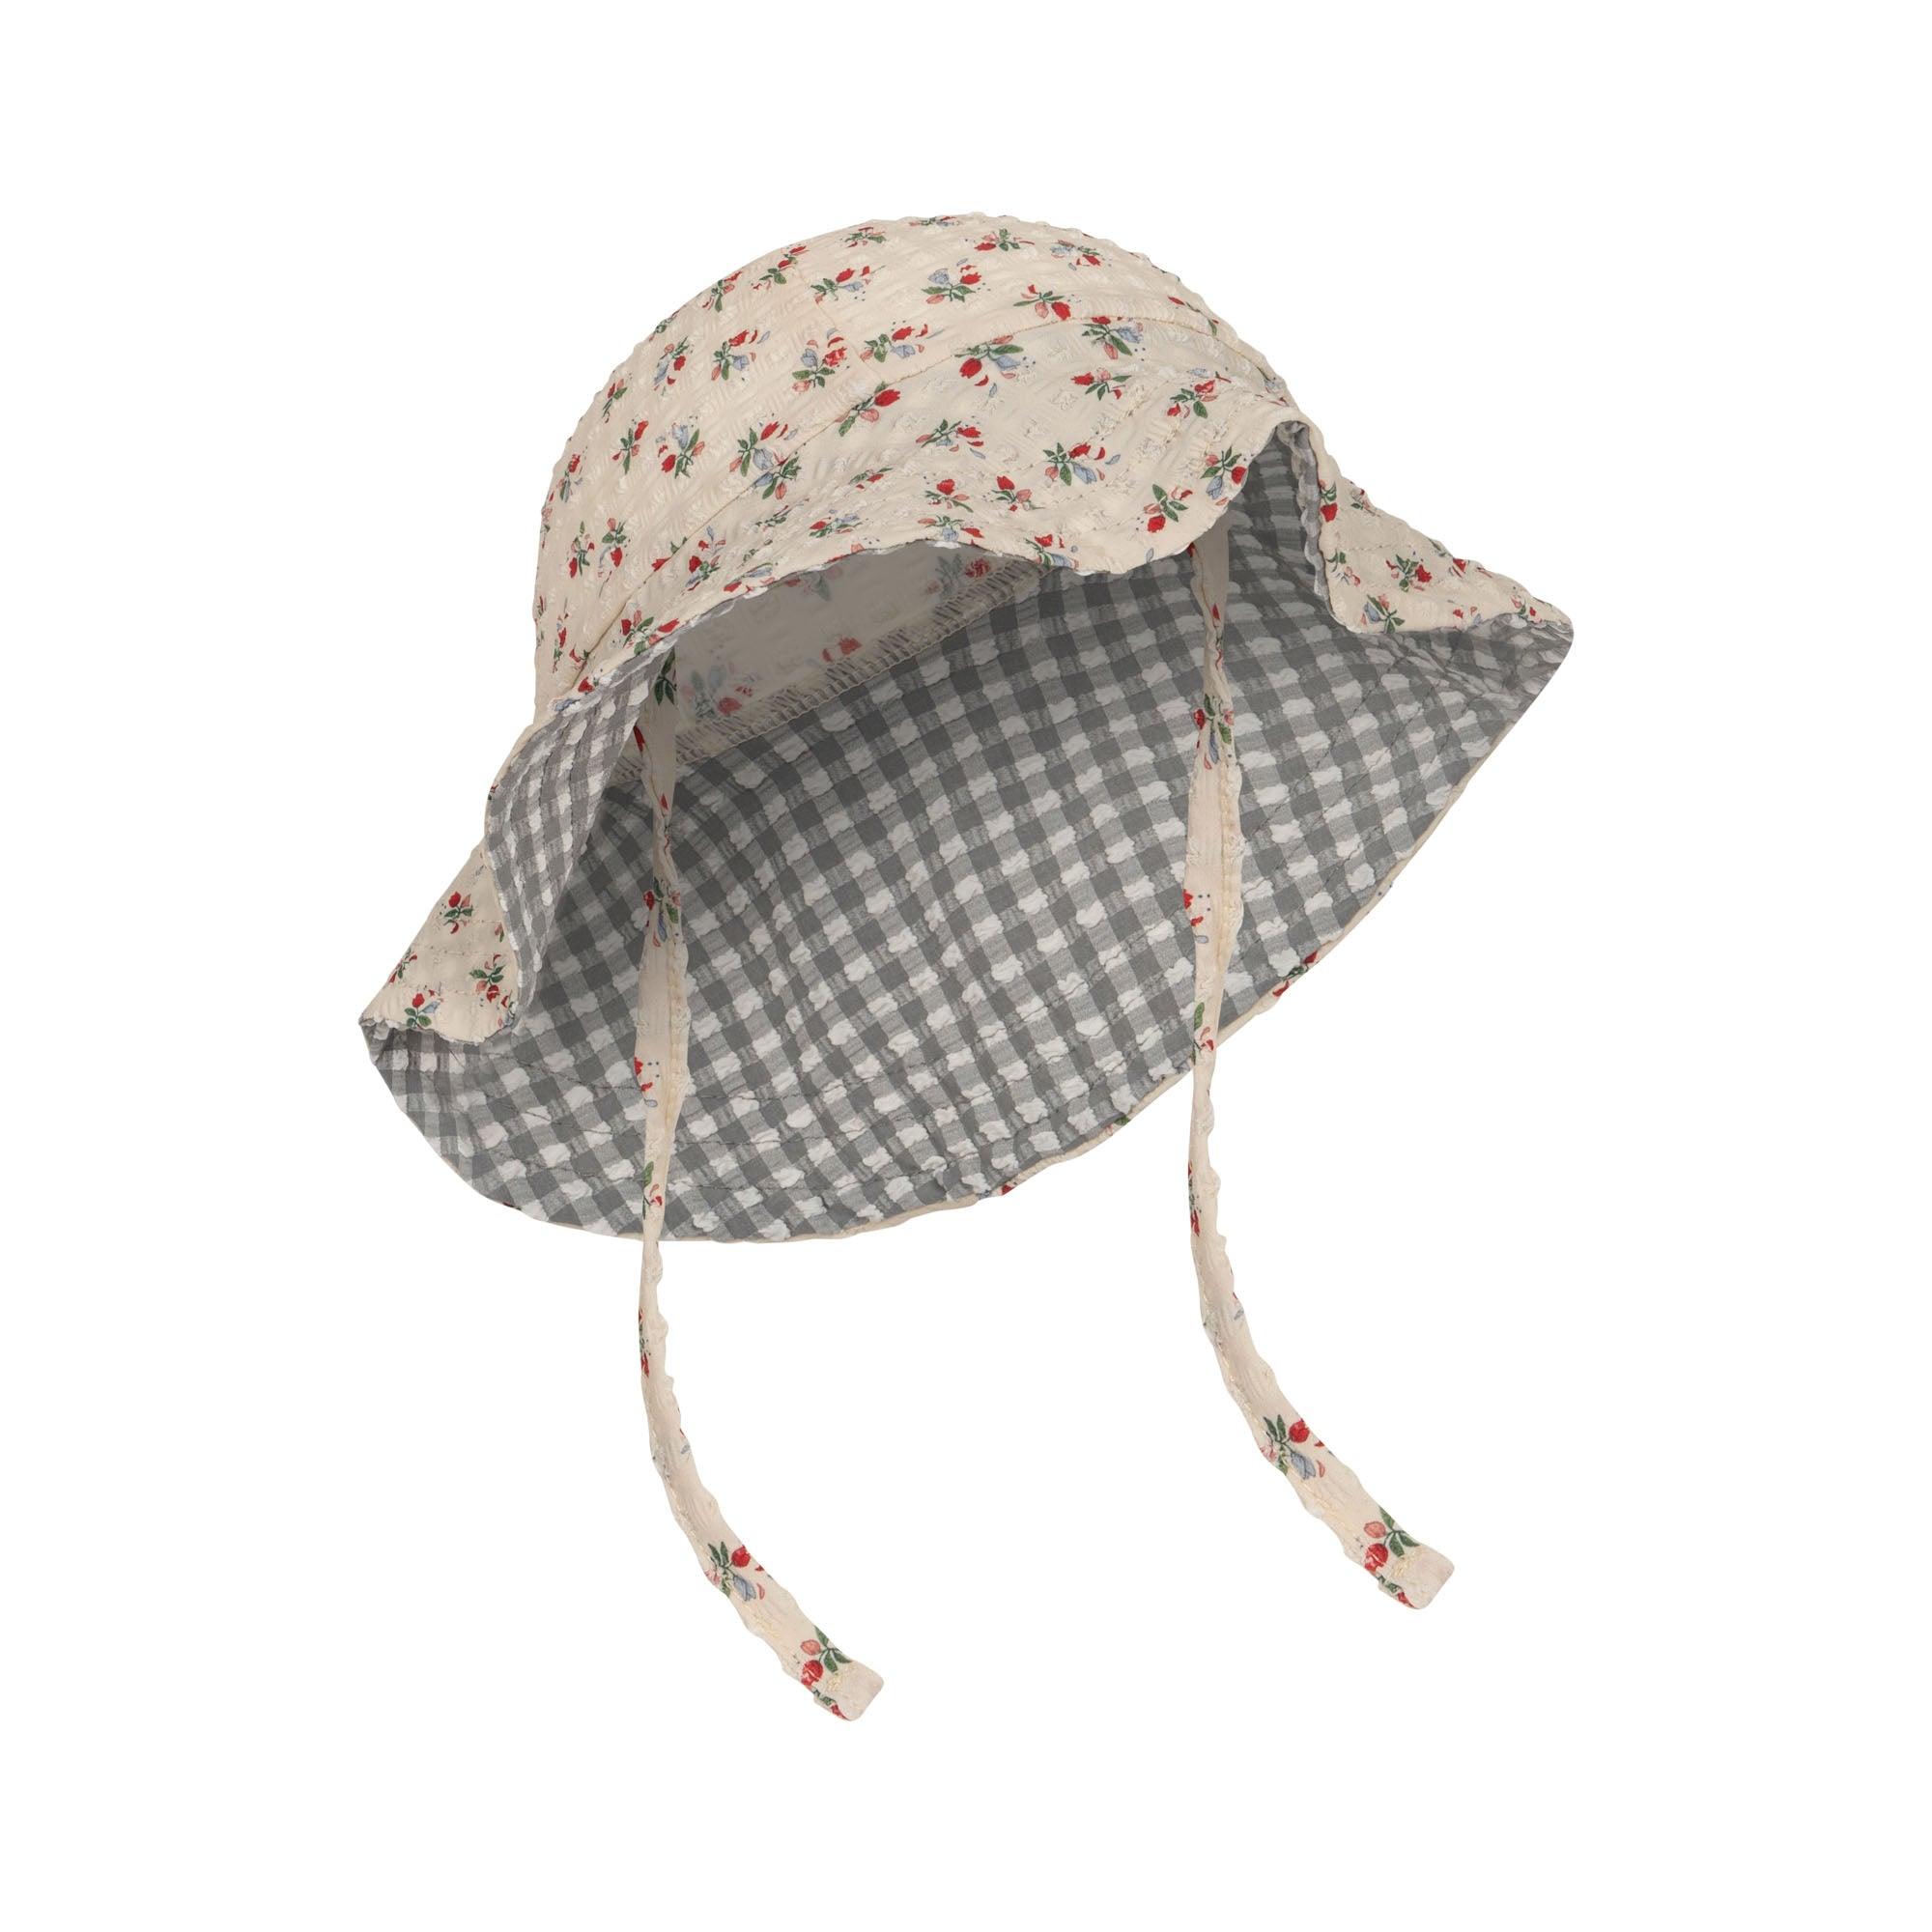 SERAPHINE SUN HAT - FLEUR TRICOLORE - Why and Whale